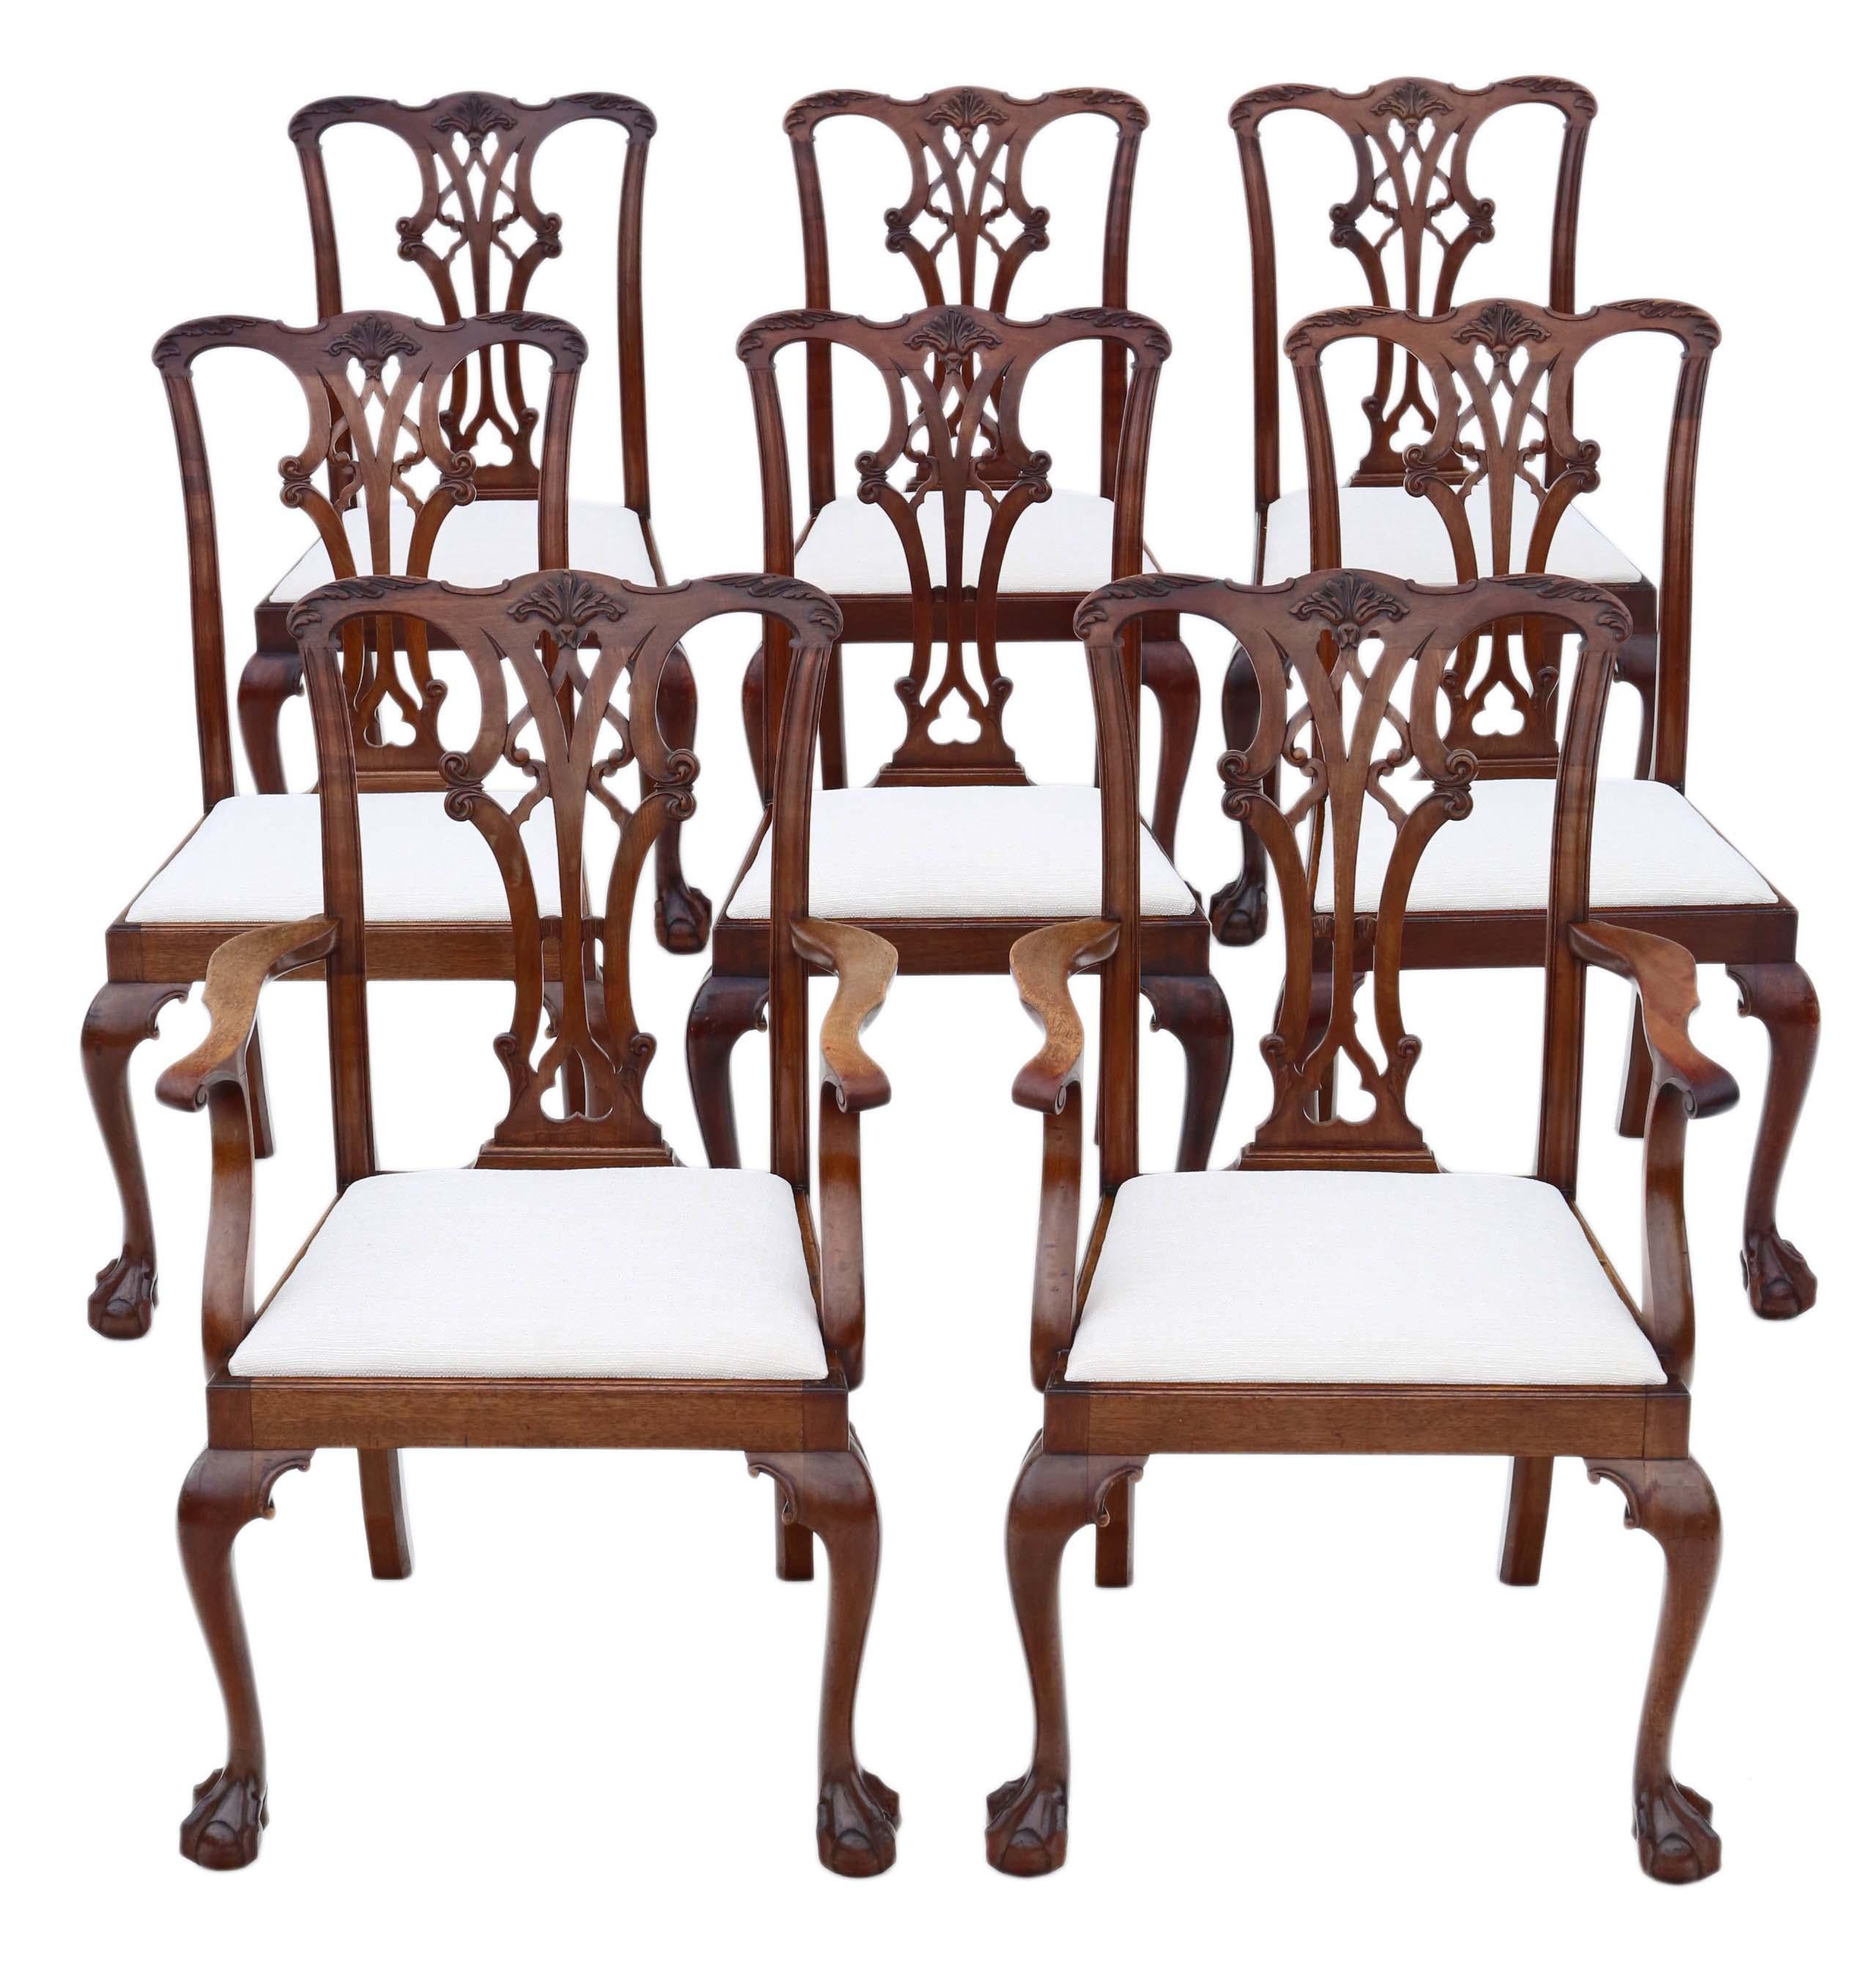 Discover the timeless charm of this antique set of 8 (6+2) mahogany dining chairs, embodying the Georgian revival style circa 1910. These chairs feature a solid construction with no loose joints, showcasing a lovely and elegant design typical of the